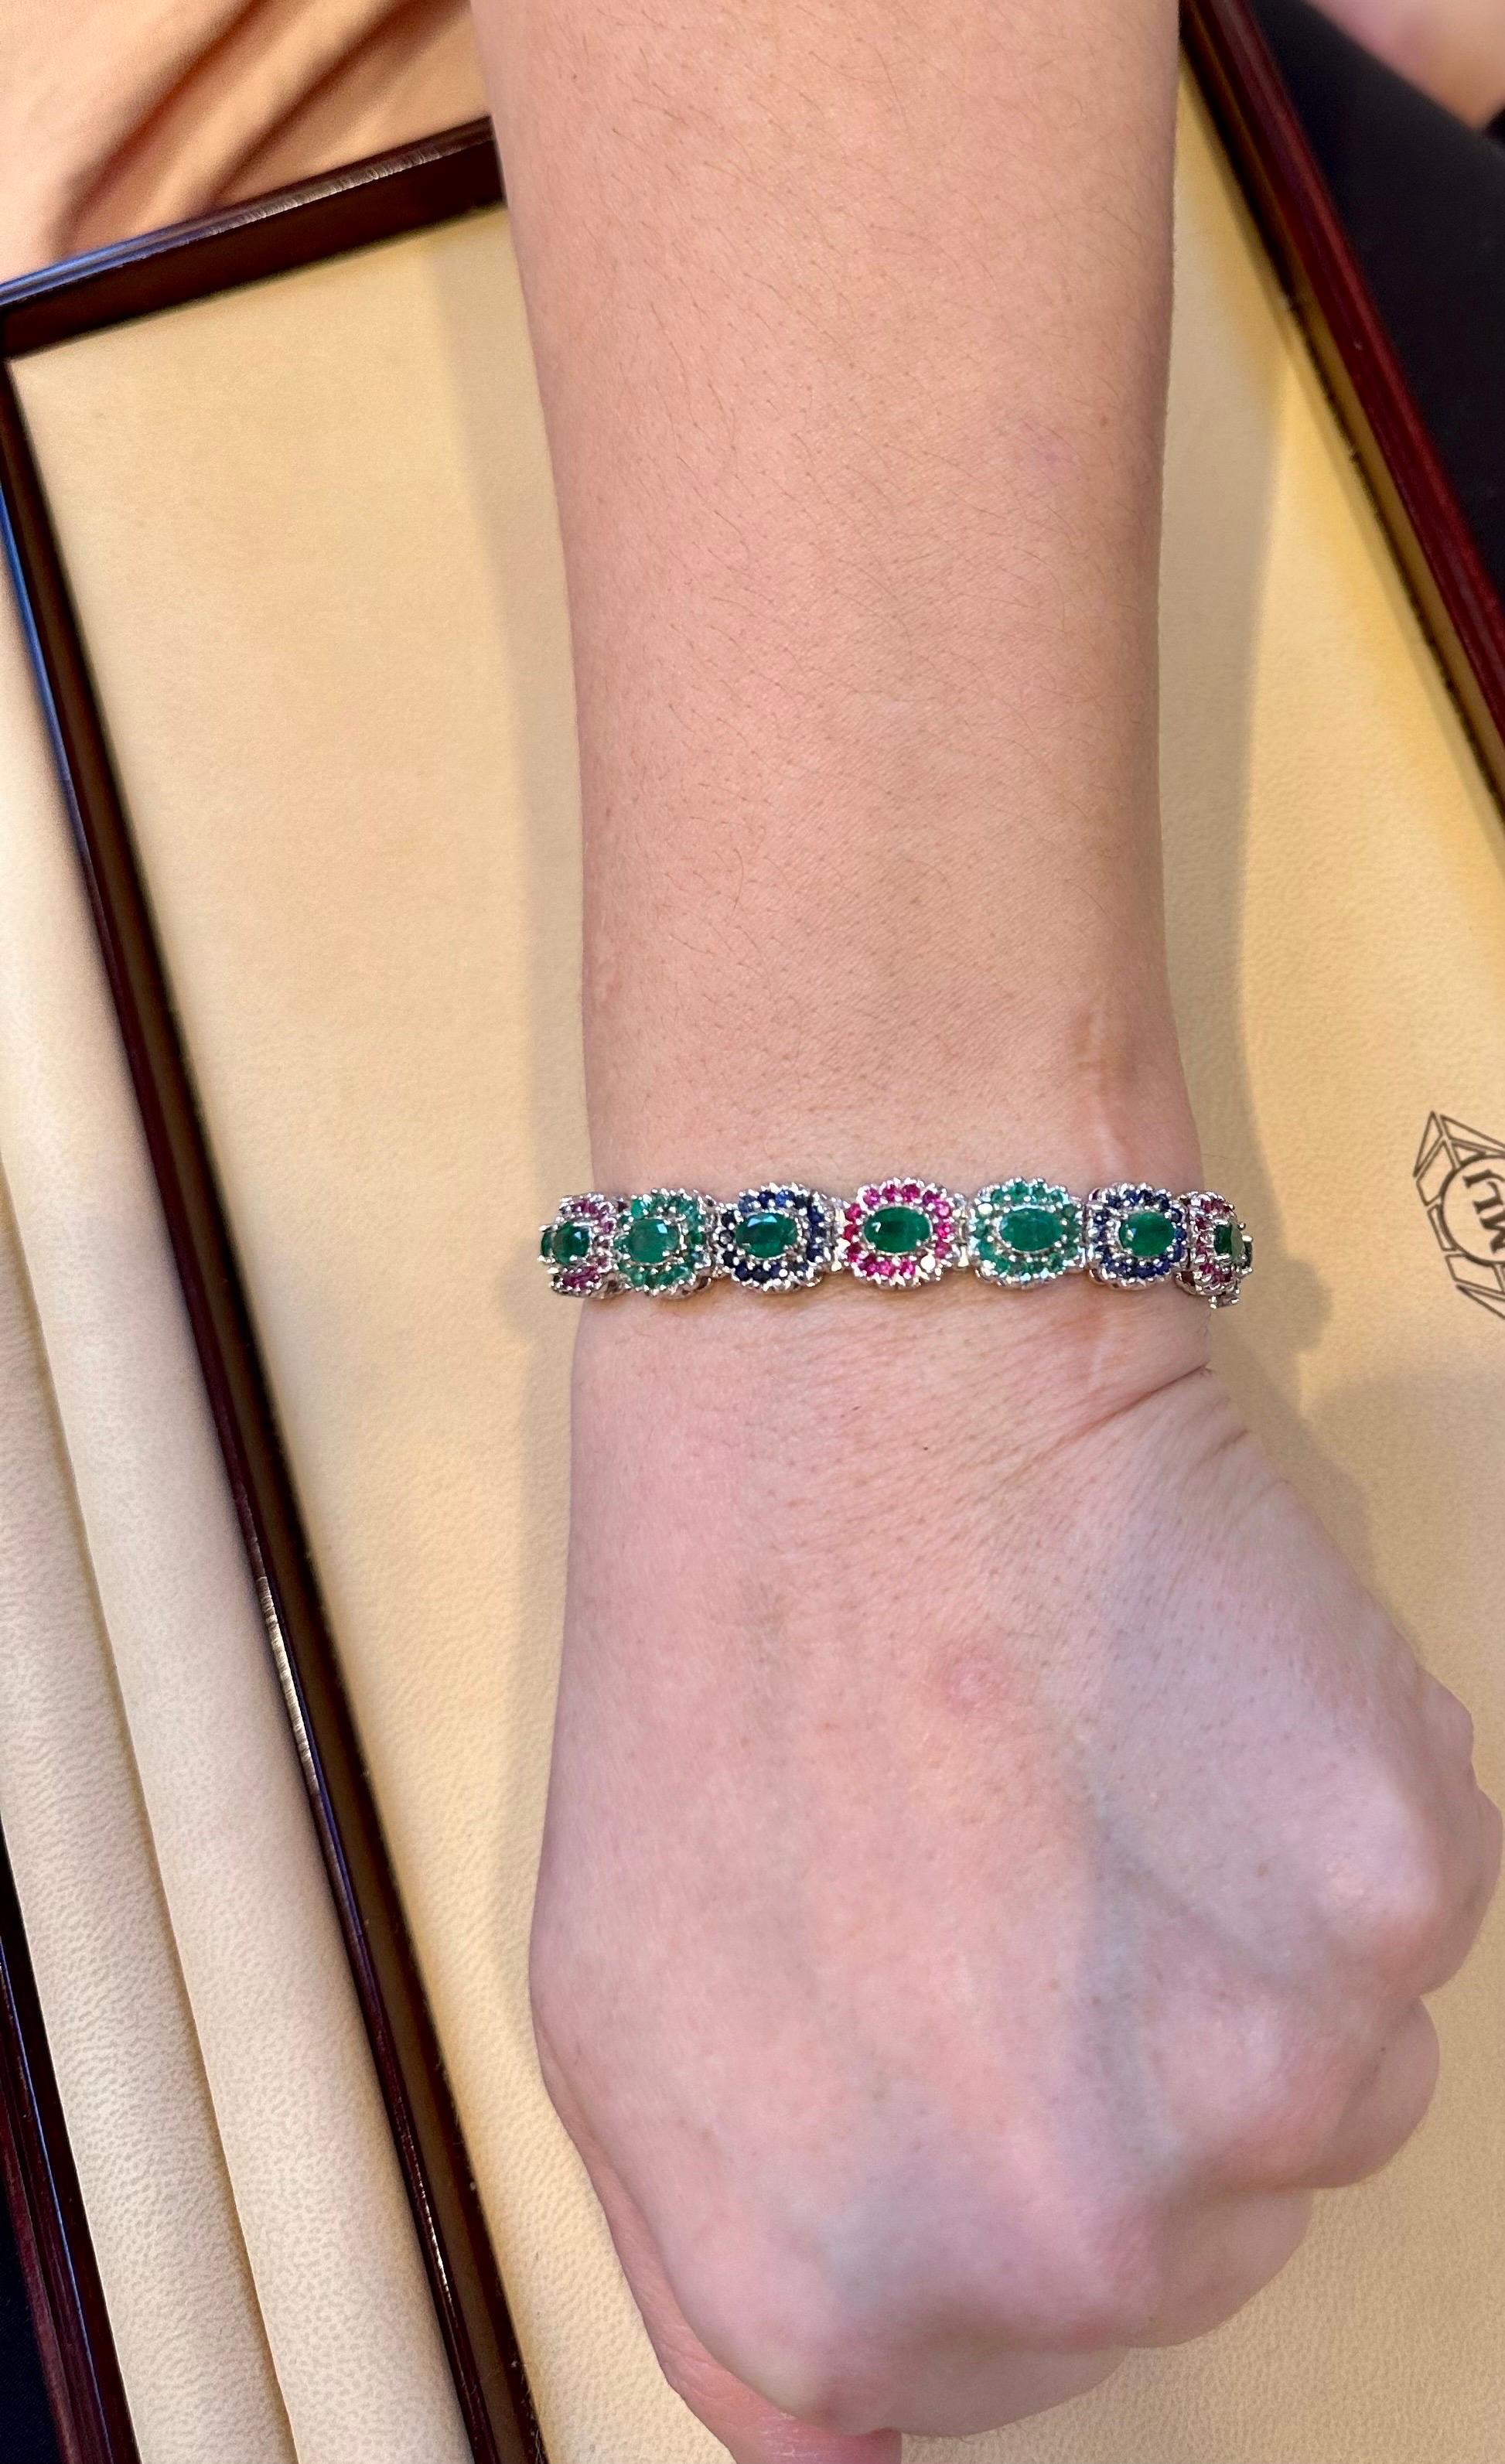 8 Ct Oval Cut Emerald & Ruby & Sapphire Tennis Bracelet 14 Kt White Gold 25.5Gm For Sale 6